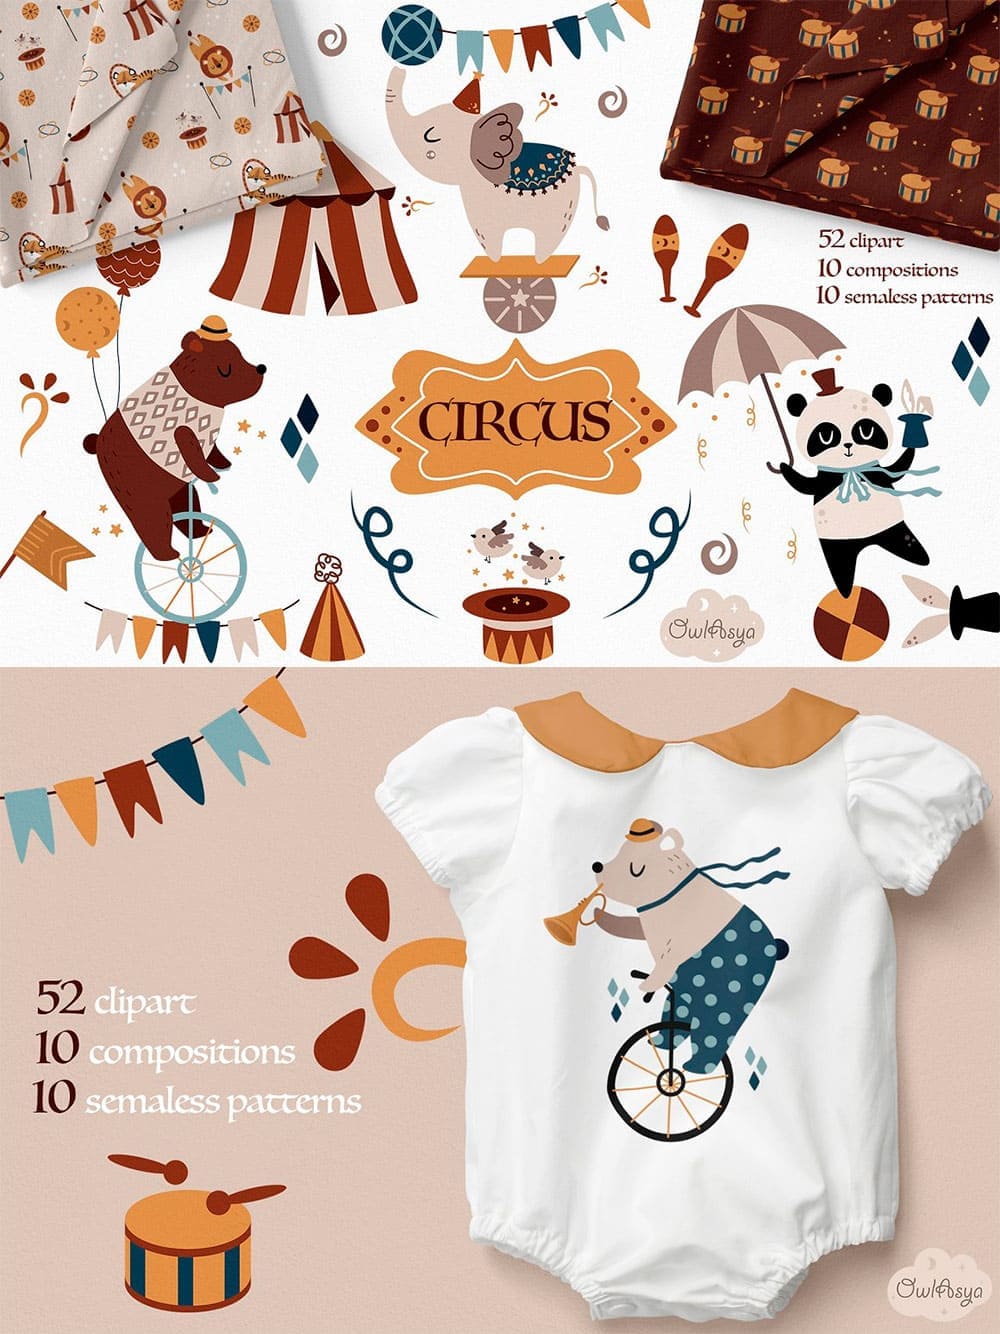 Circus animals collection, picture for pinterest.